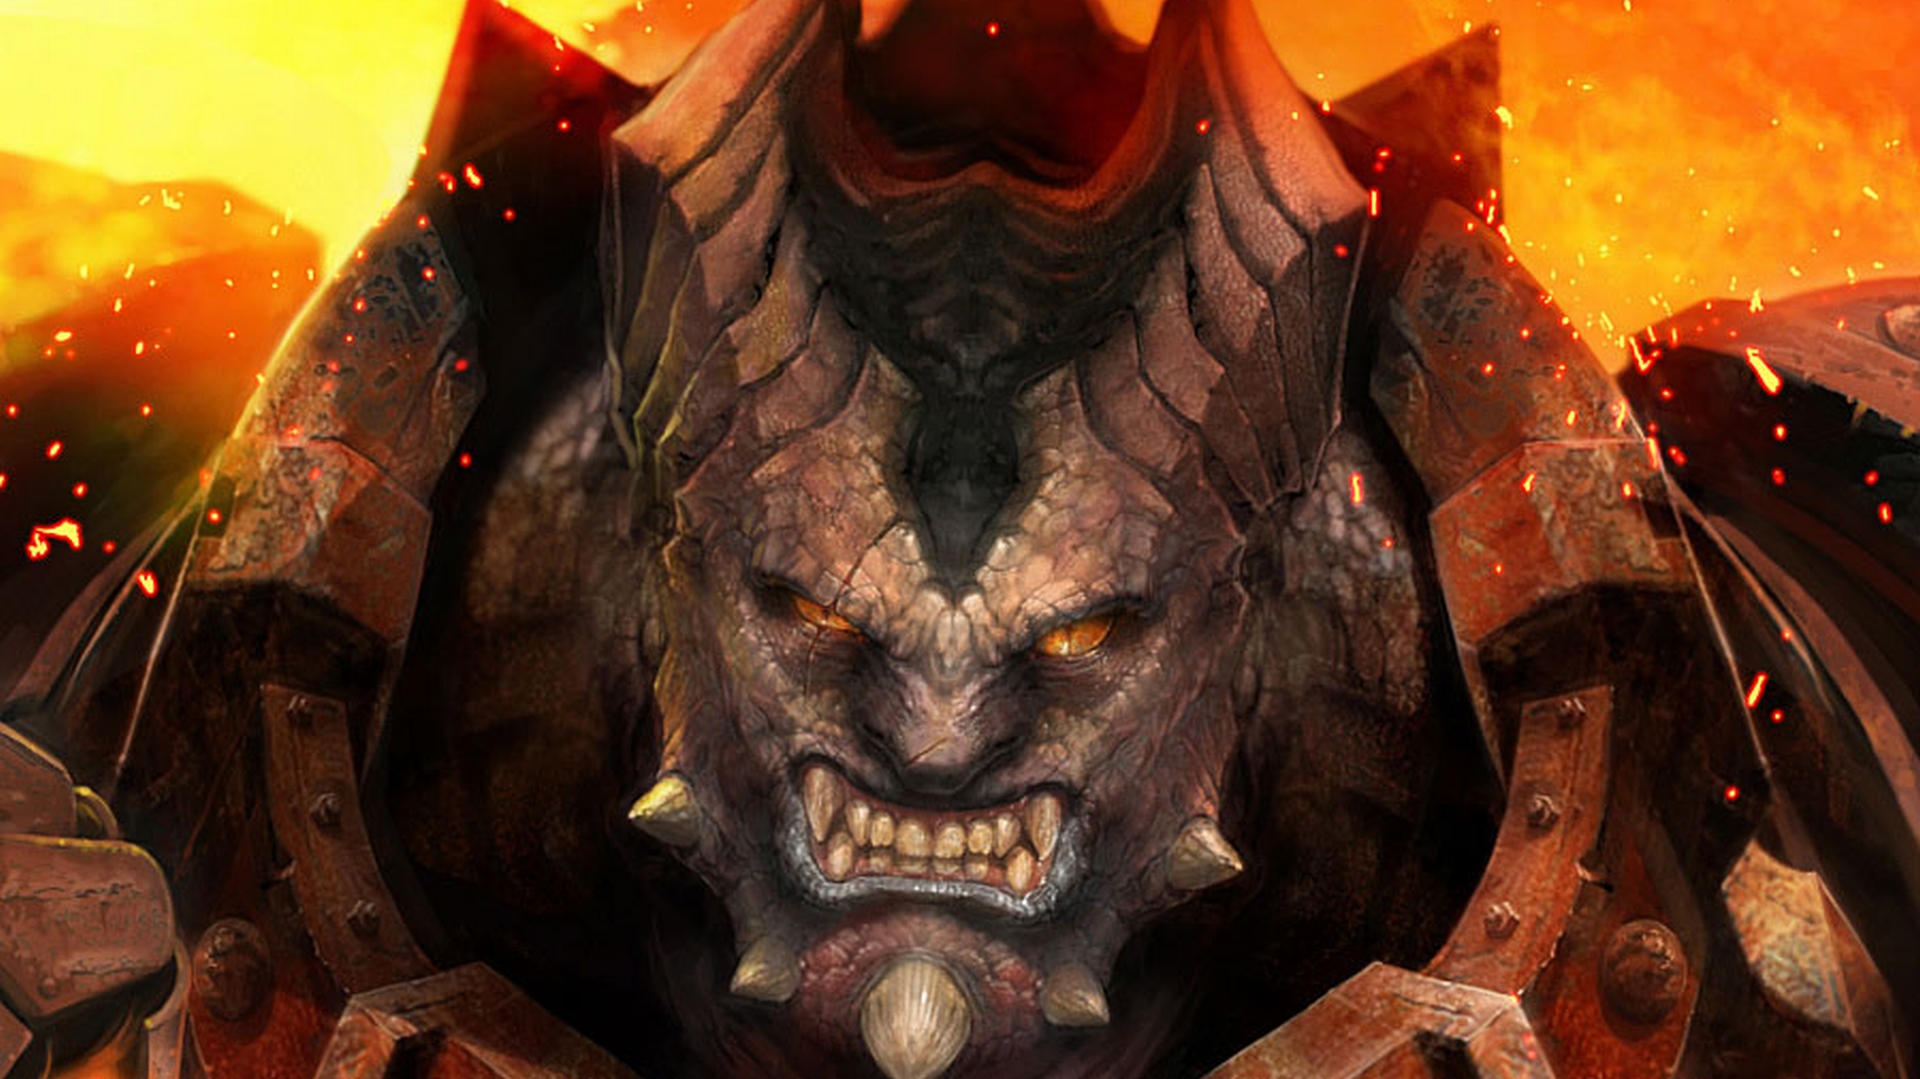 Download mobile wallpaper Tera, Video Game for free.